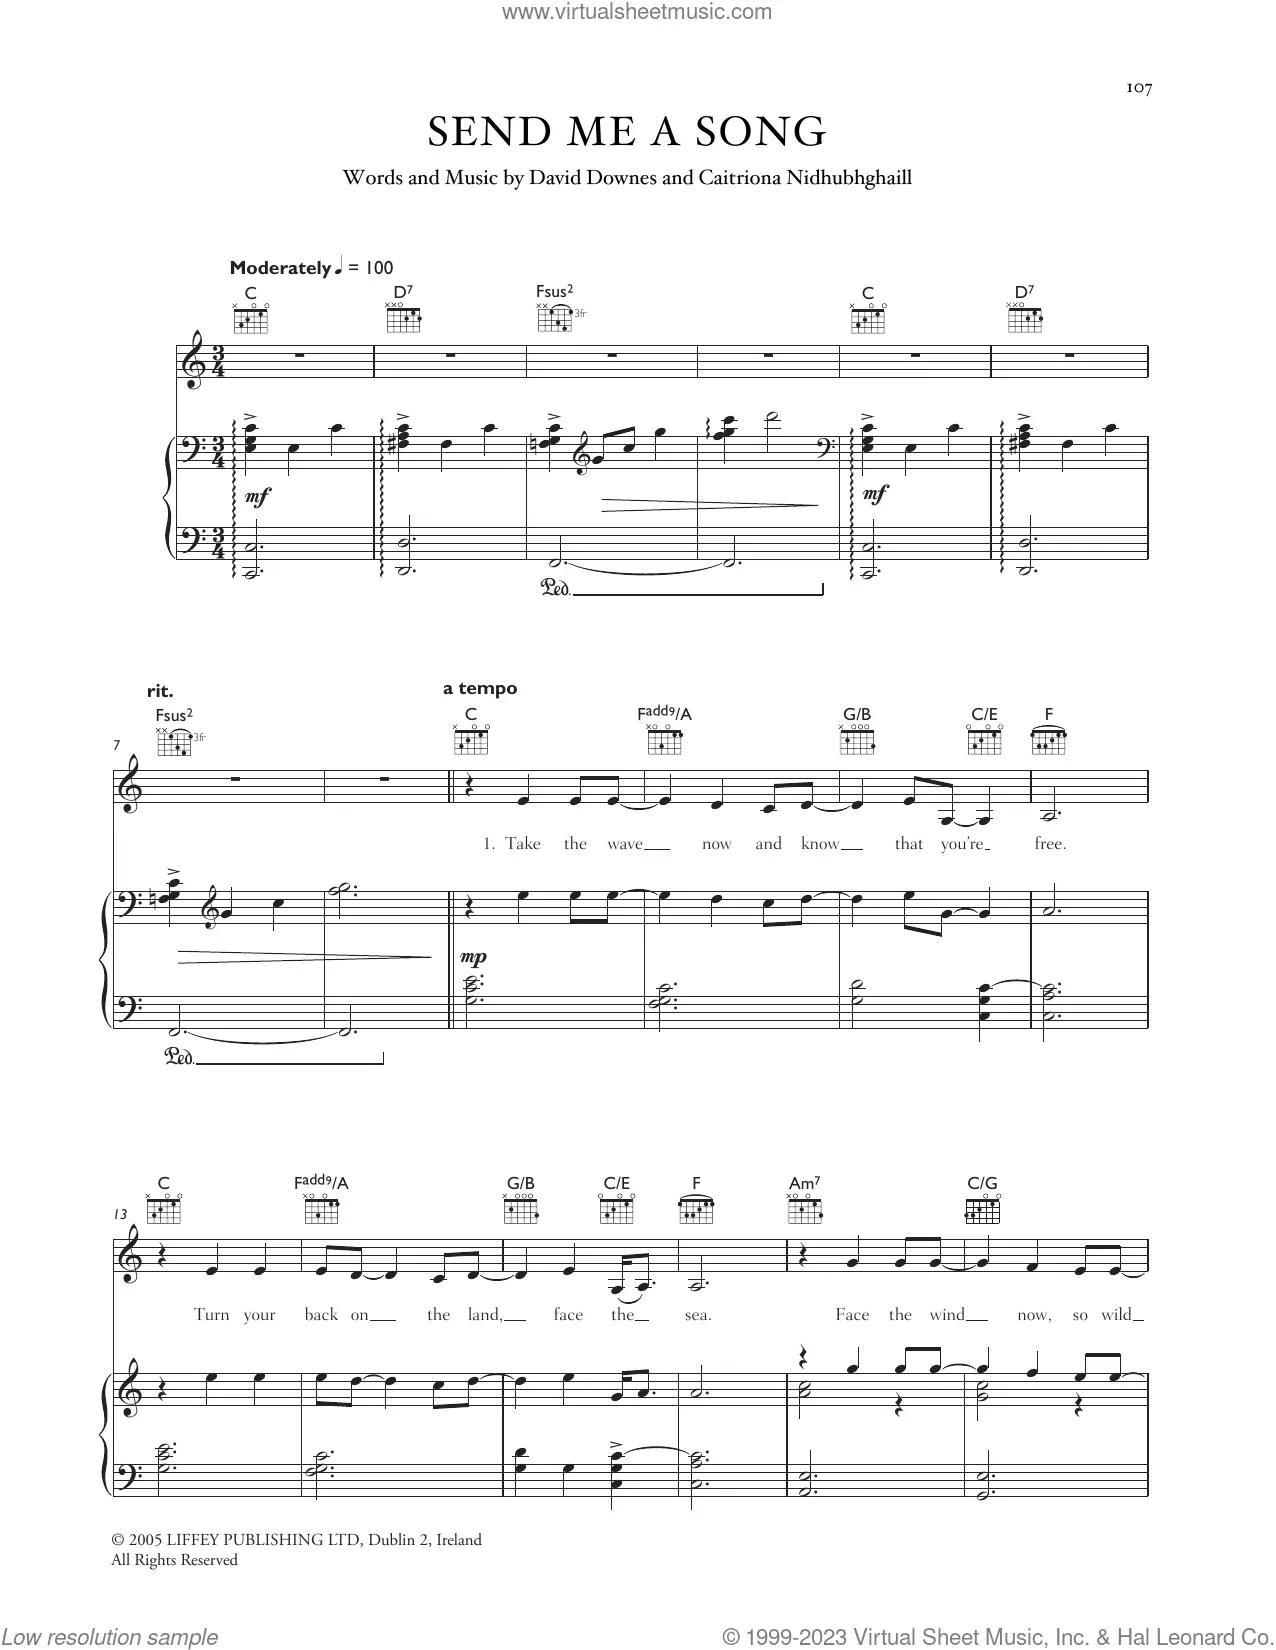 Woman sheet music for voice, piano or guitar (PDF) v2